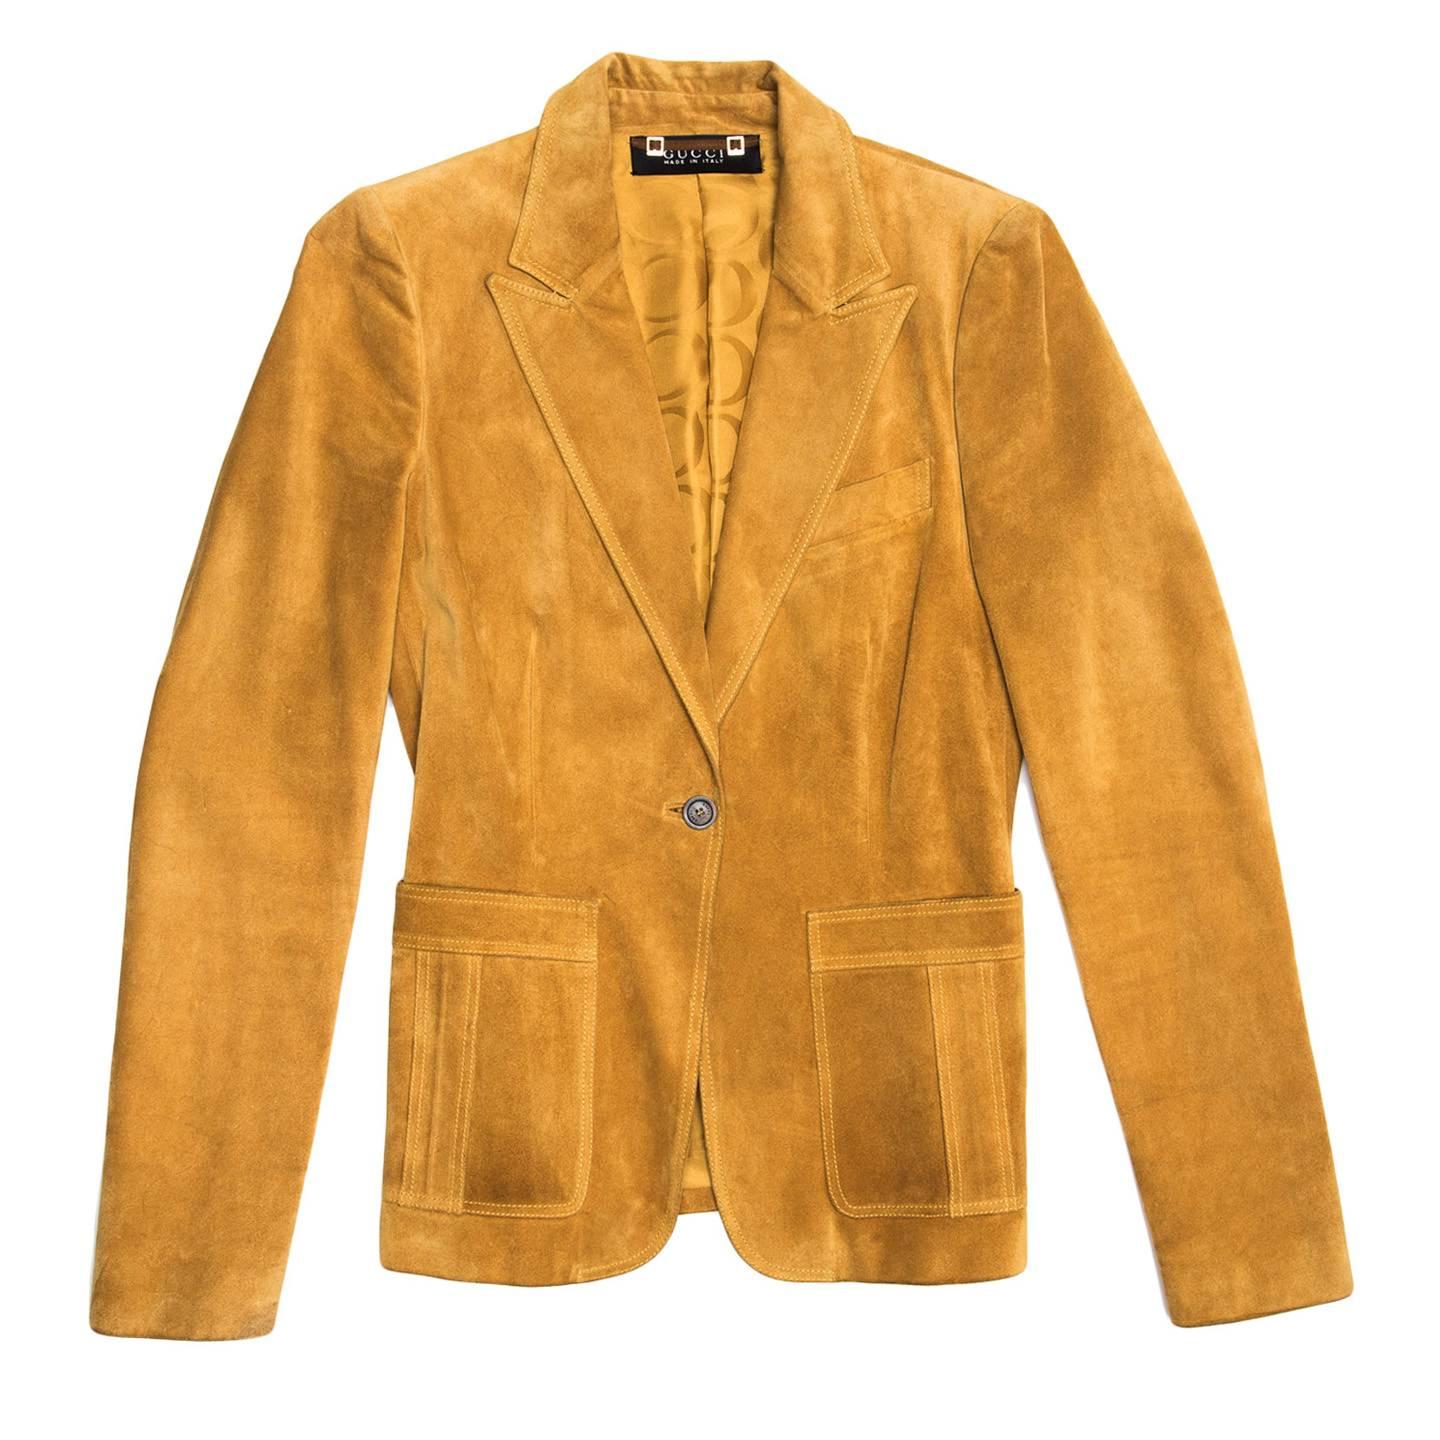 Ochre color suede single breasted jacket, blazer cut, with peaked collar, breast pocket and bellow patch pockets at hips. The single button at front and the buttons at cuffs are made of dark brown corn to create contract with the body color. Made in